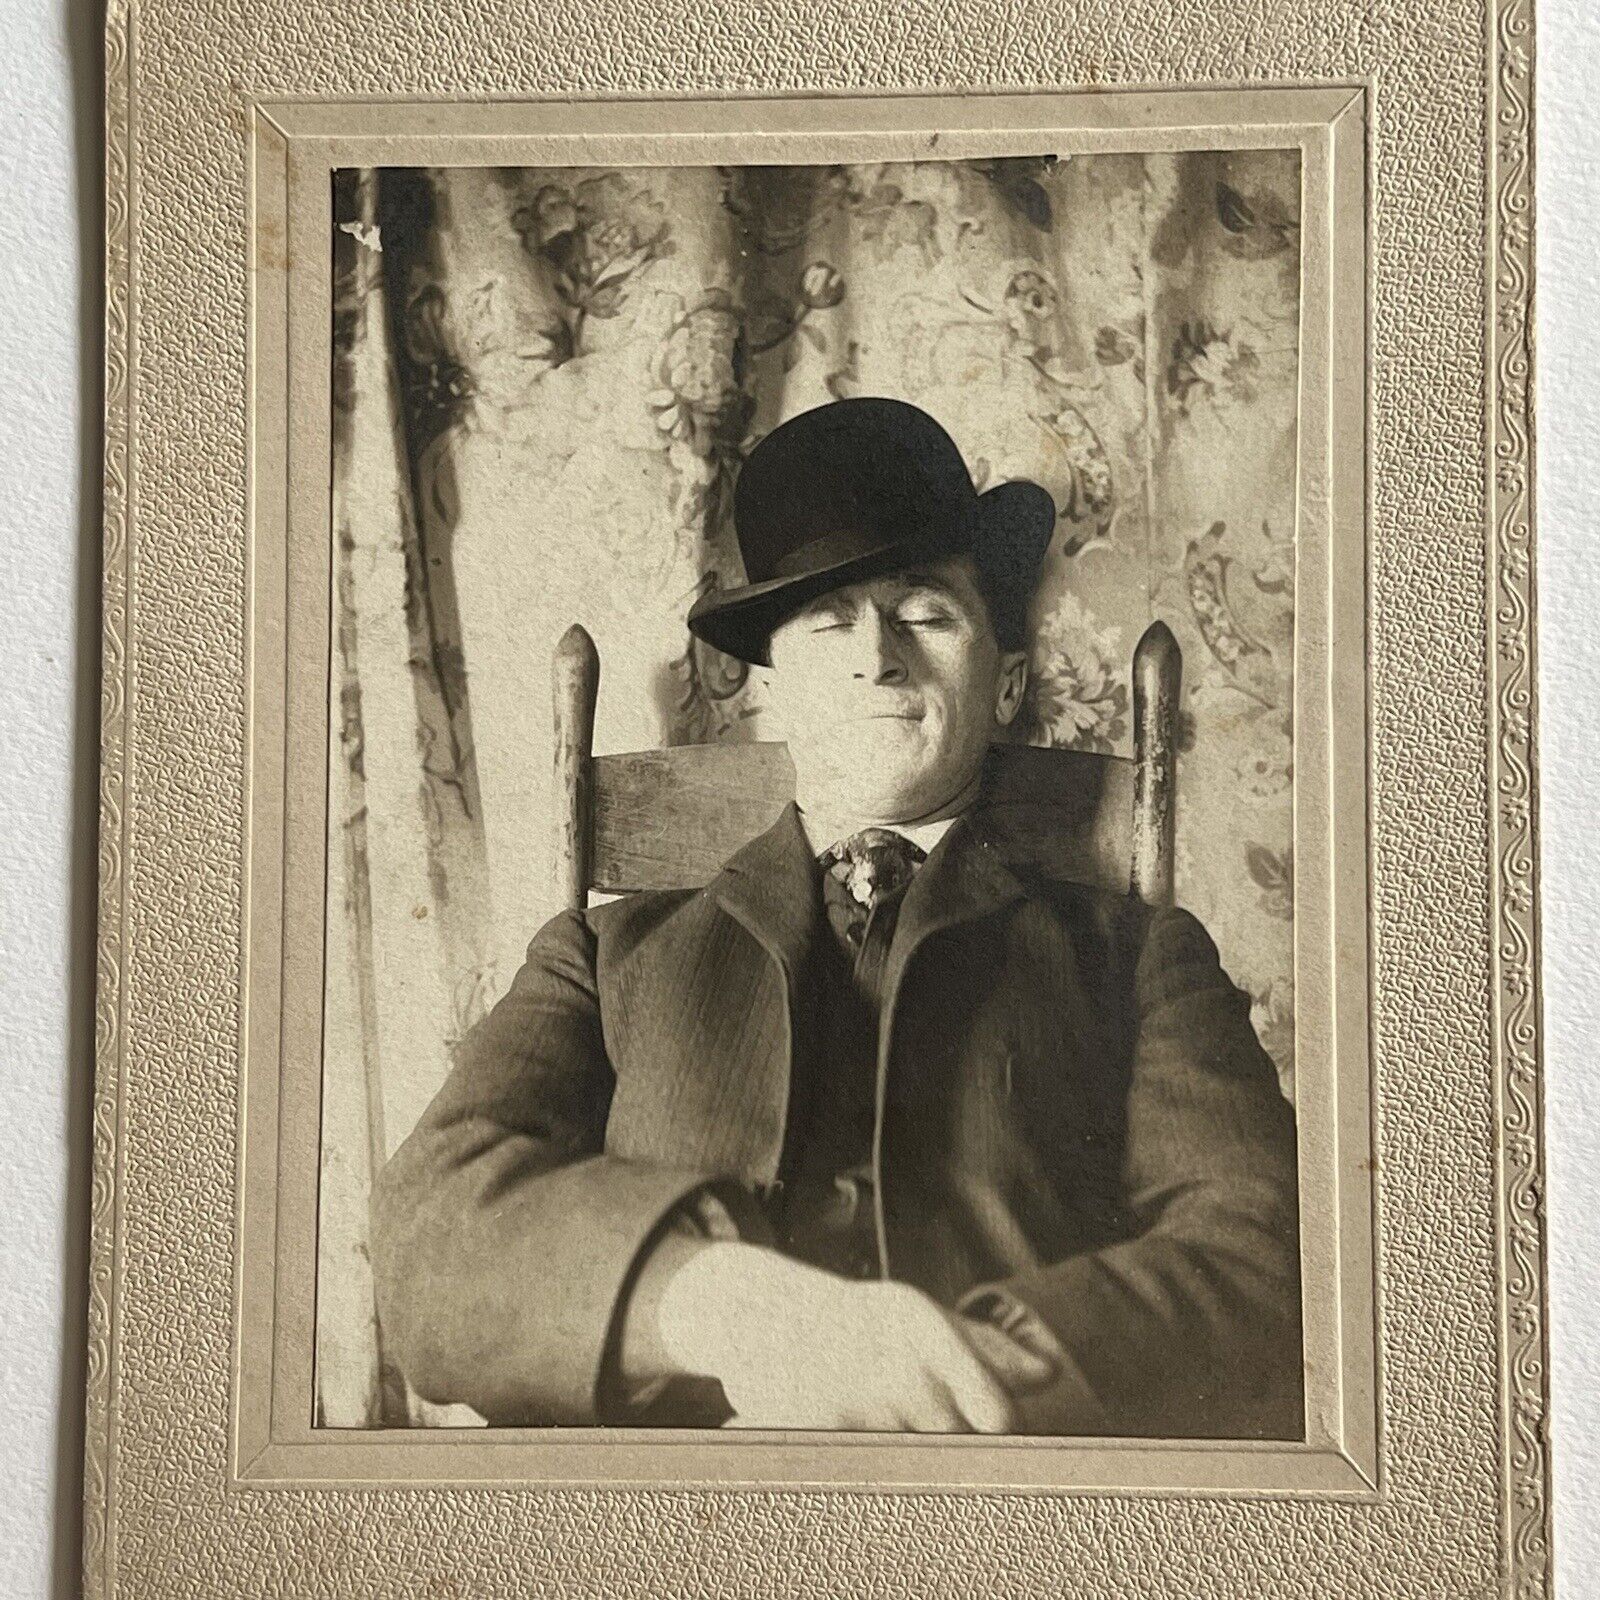 Antique Cabinet Card Photograph Post Mortem Man In Chair Bowler Hat Odd